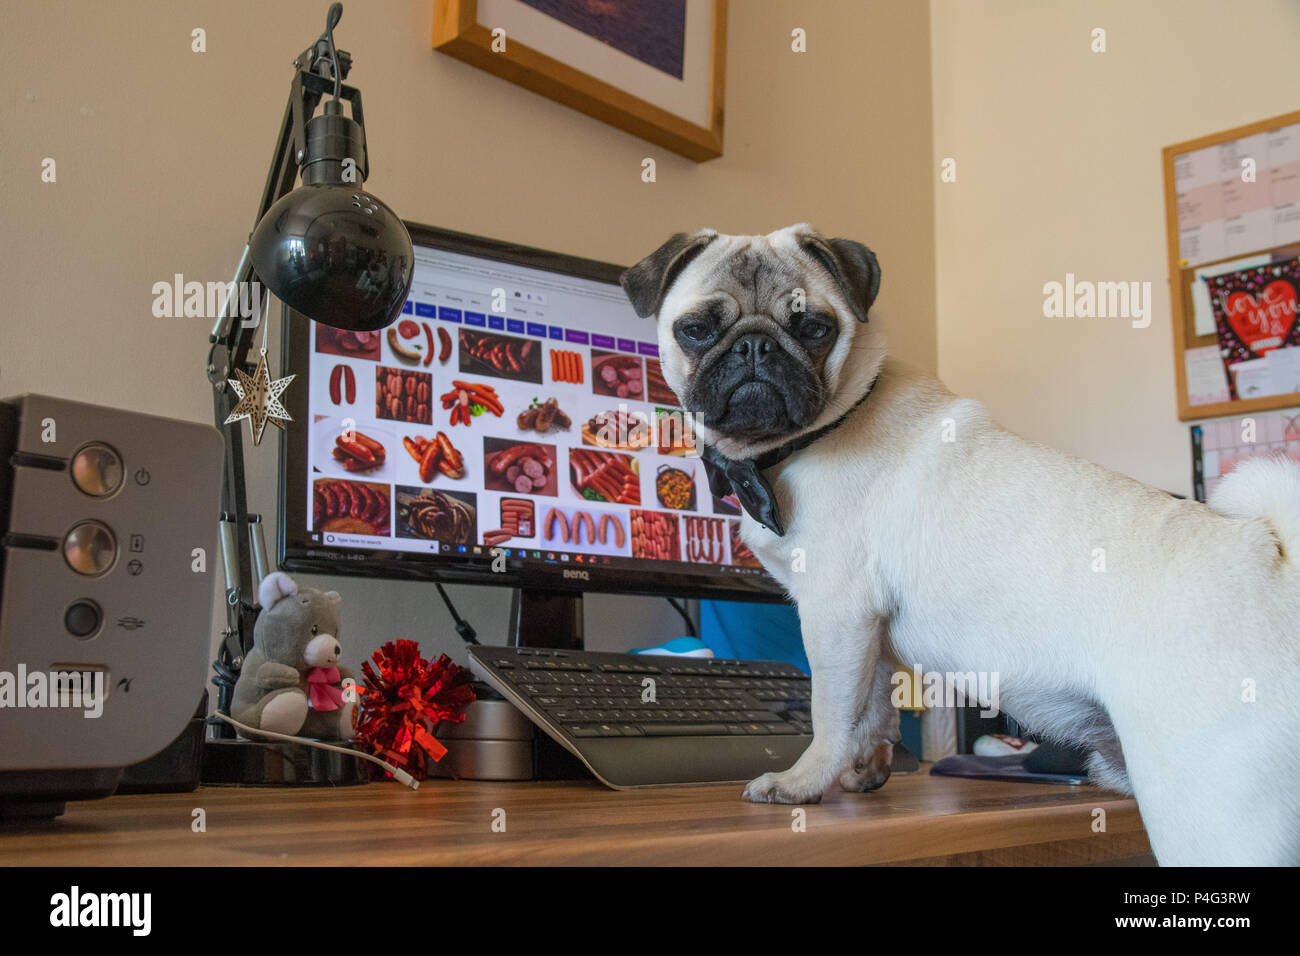 Mousehole, Cornwall, UK. 22nd June 2018. Titan the pug pup was allowed in the office today for international bring your dog to work day. Credit: Simon Maycock/Alamy Live News Stock Photo